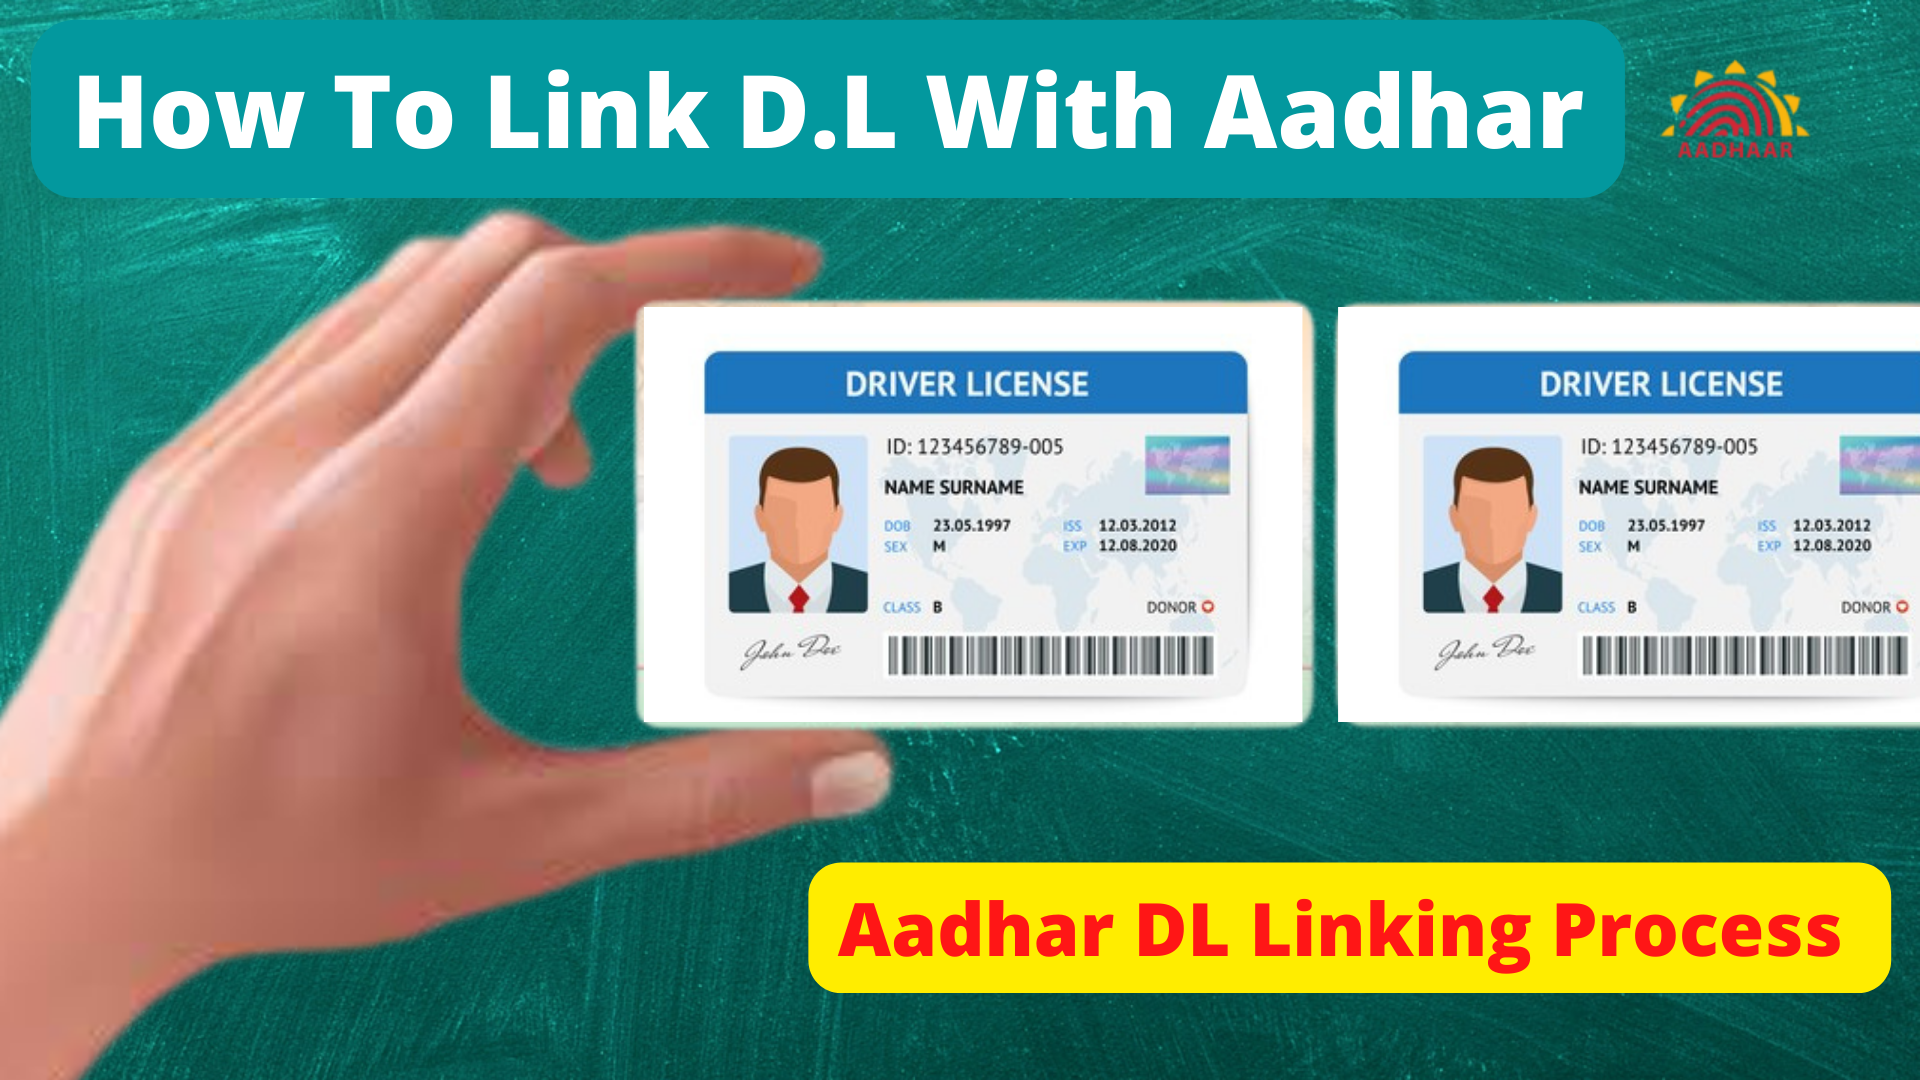 How To Link D.L With Aadhar